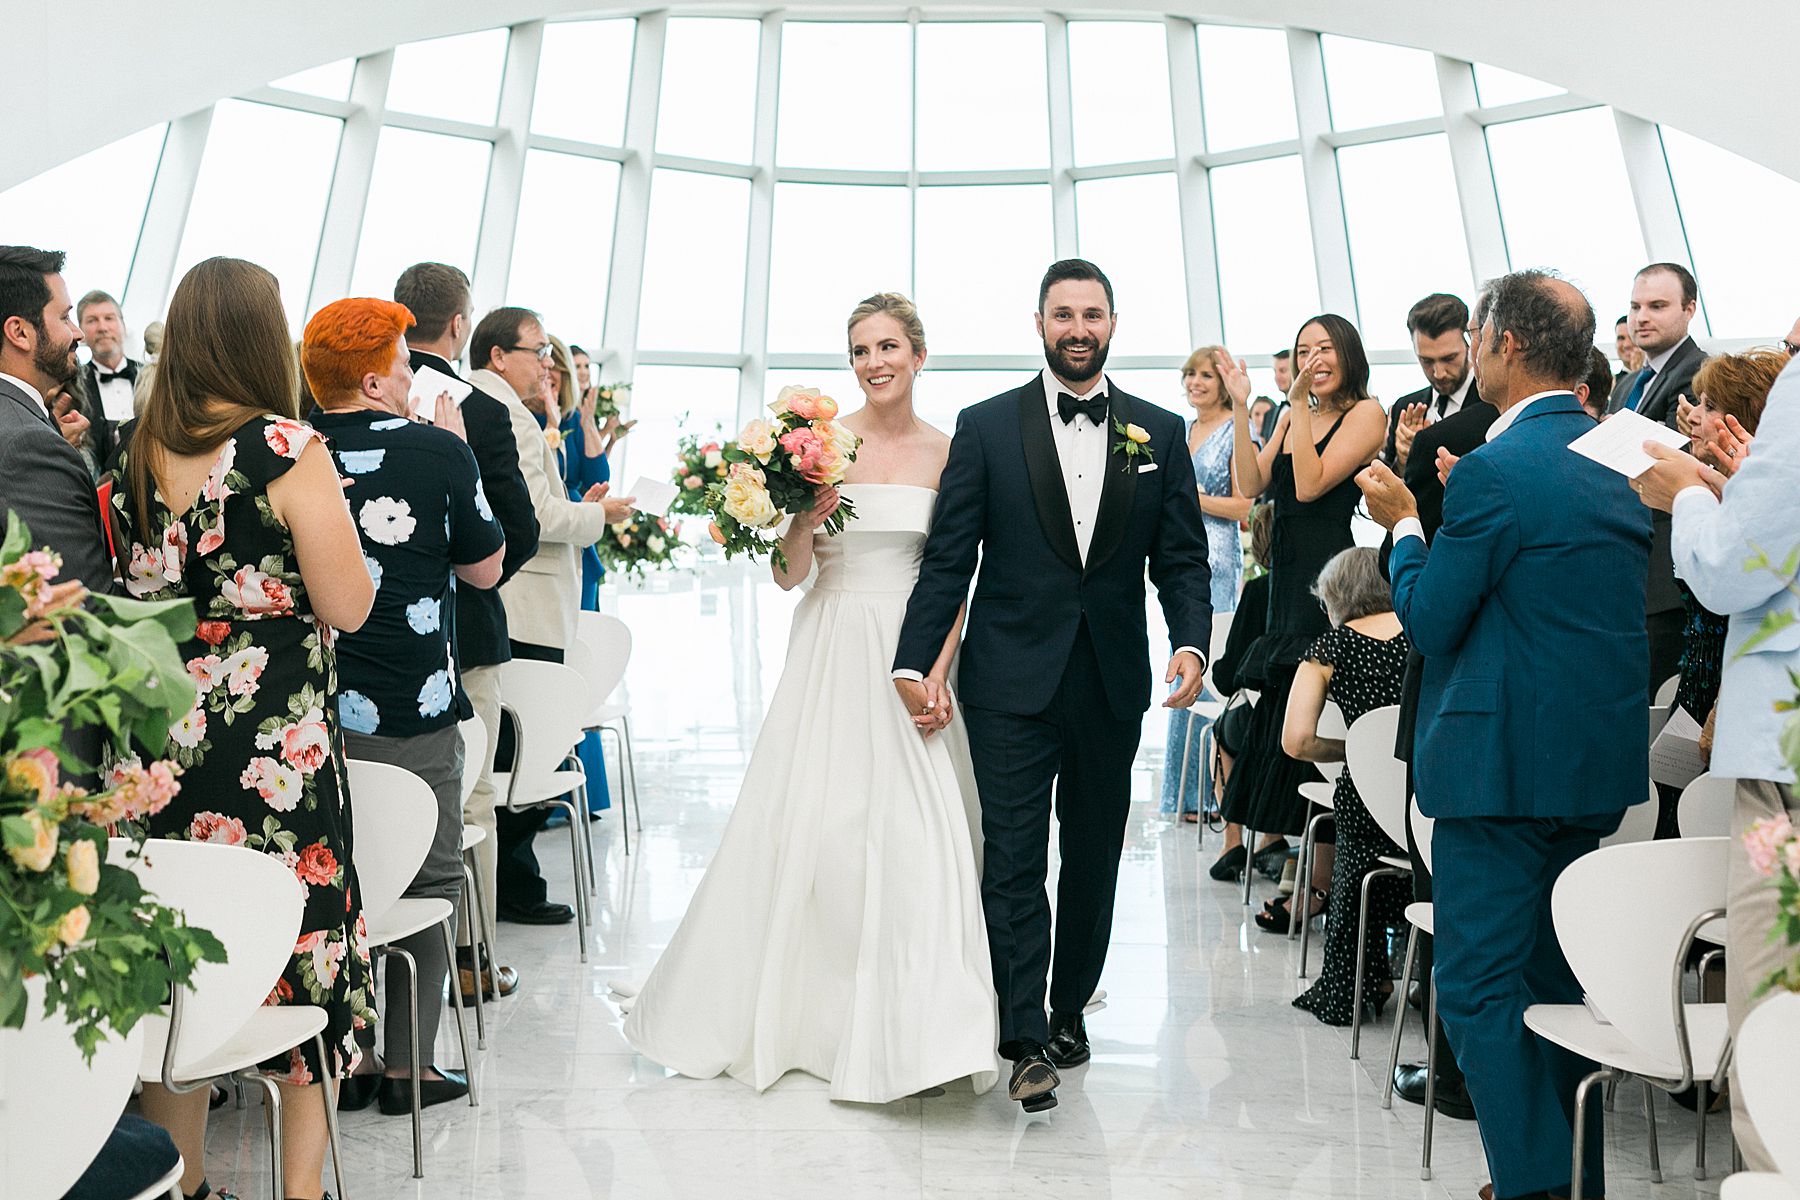 newlywed wedding exit, modern minimal white and bright wedding ceremony at milwaukee art museum an architectural gem downtown with lake michigan view